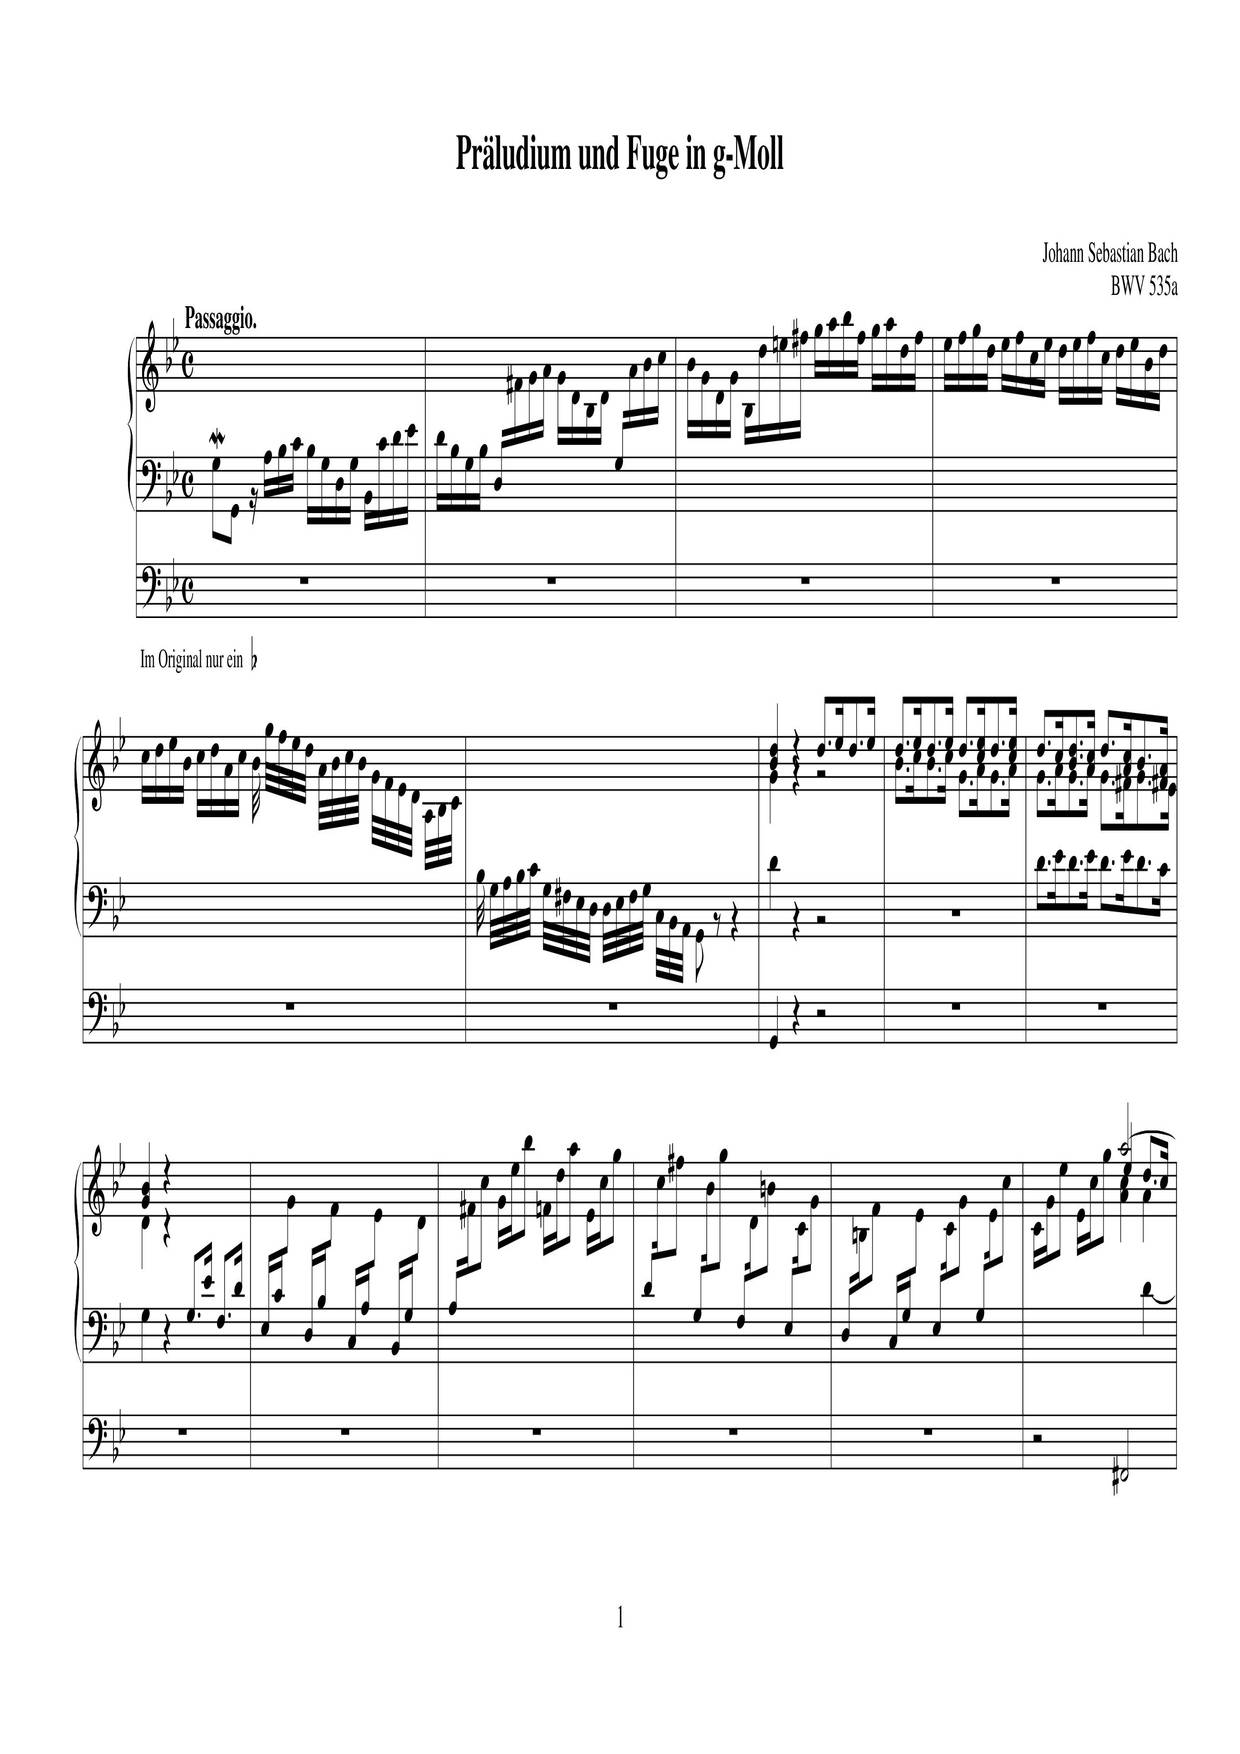 Prelude And Fugue In G Minor, BWV 535A琴谱